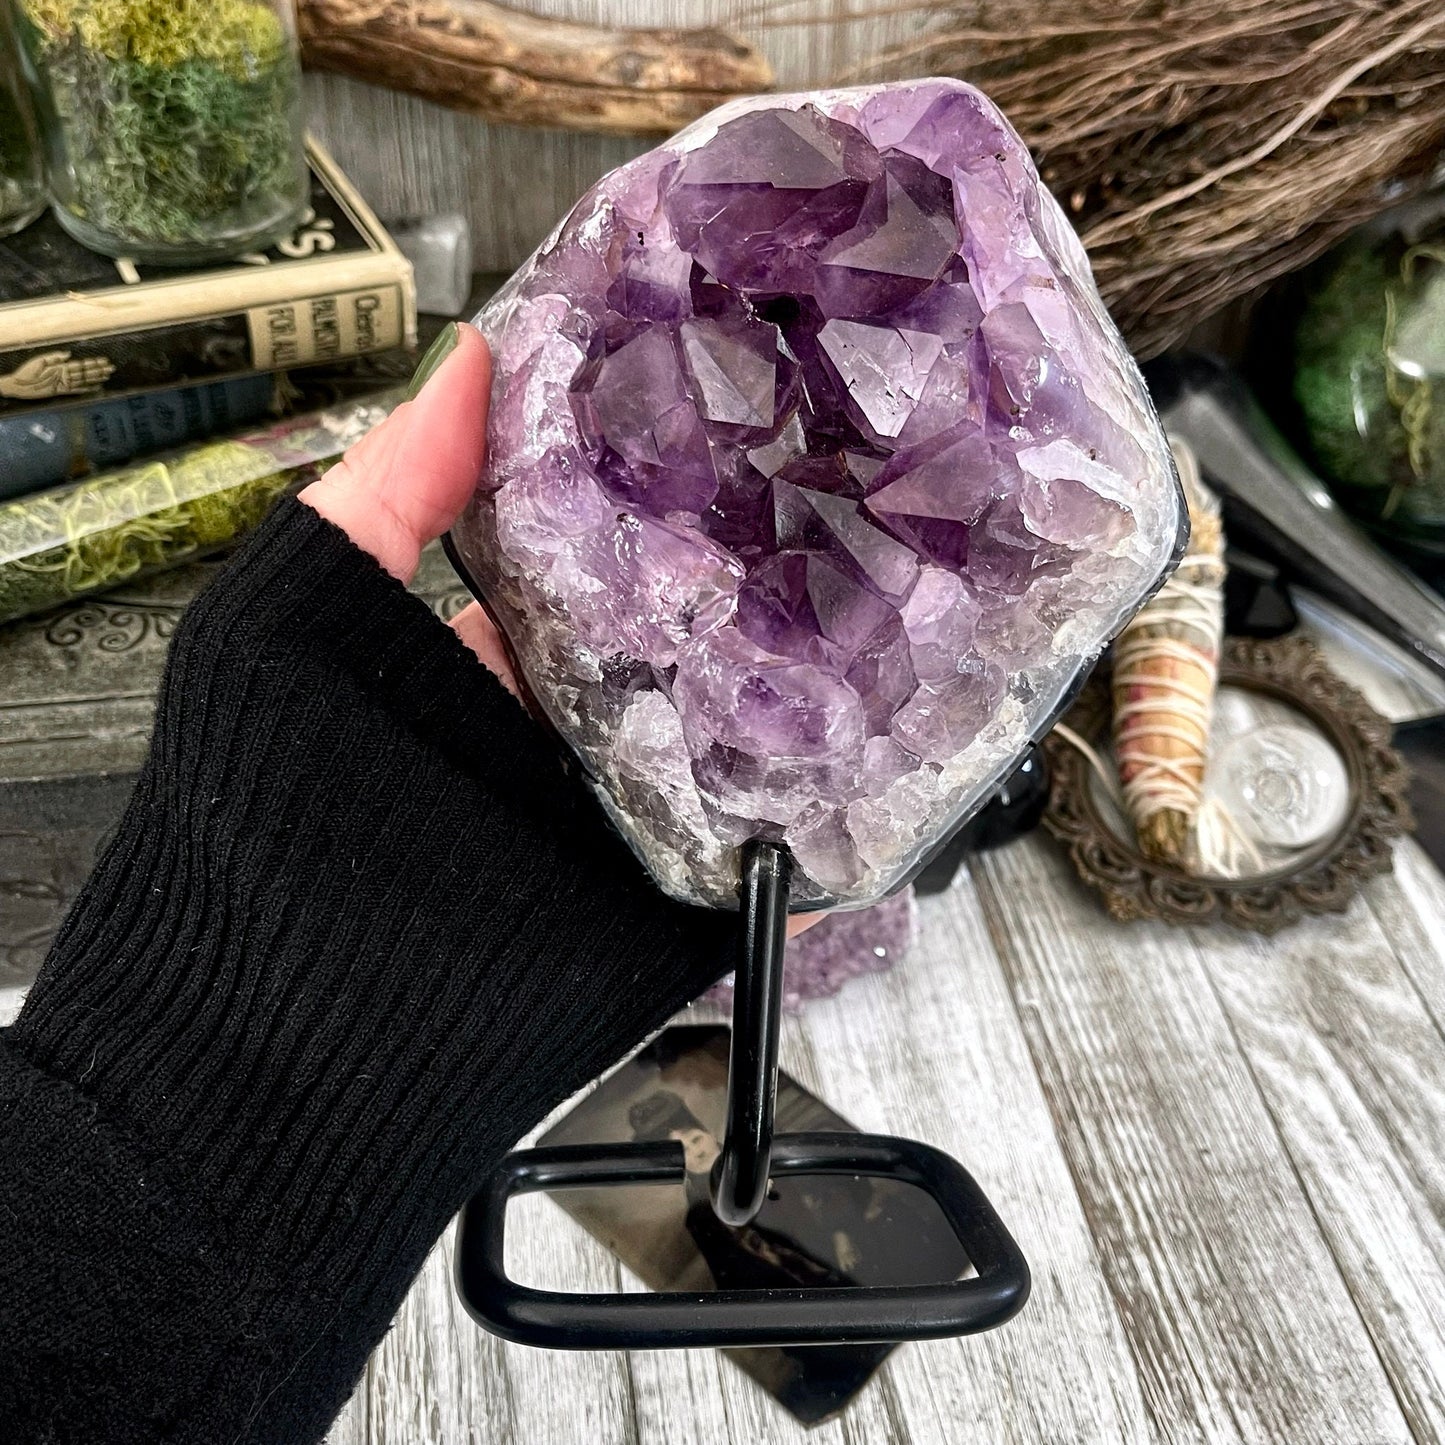 Large Purple Amethyst Crystal Druzy Cluter With Stand / FoxlarkCrystals / Big Crystal Cluster Natural Crystal Healing Crystal Home Decor